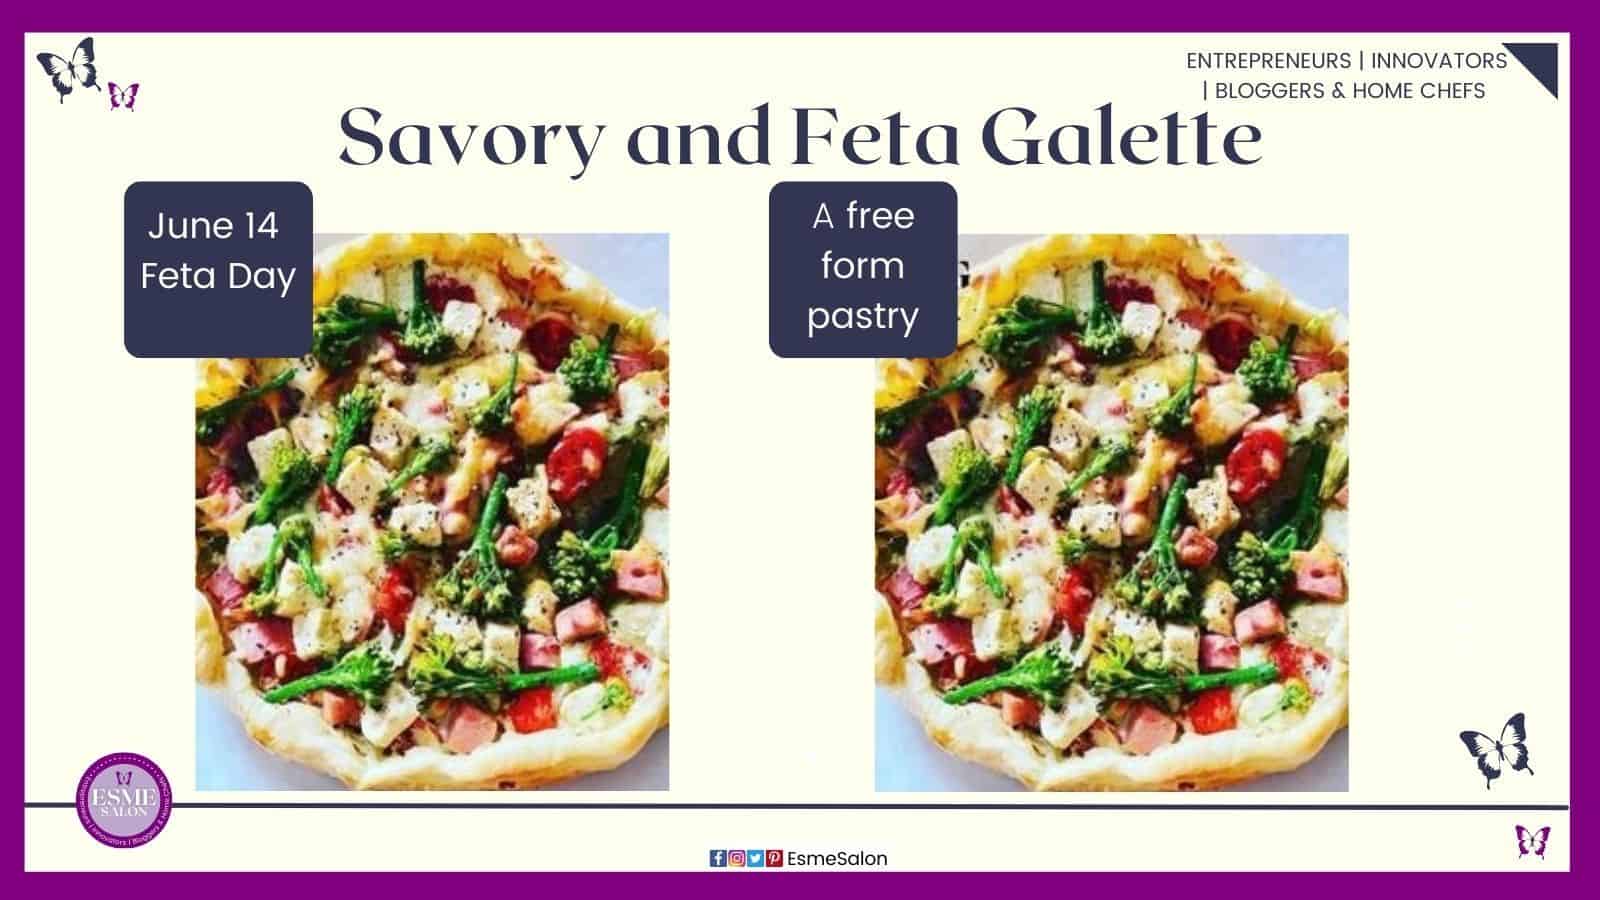 an image of a Savory and Feta Galette a free form pastry with Feta